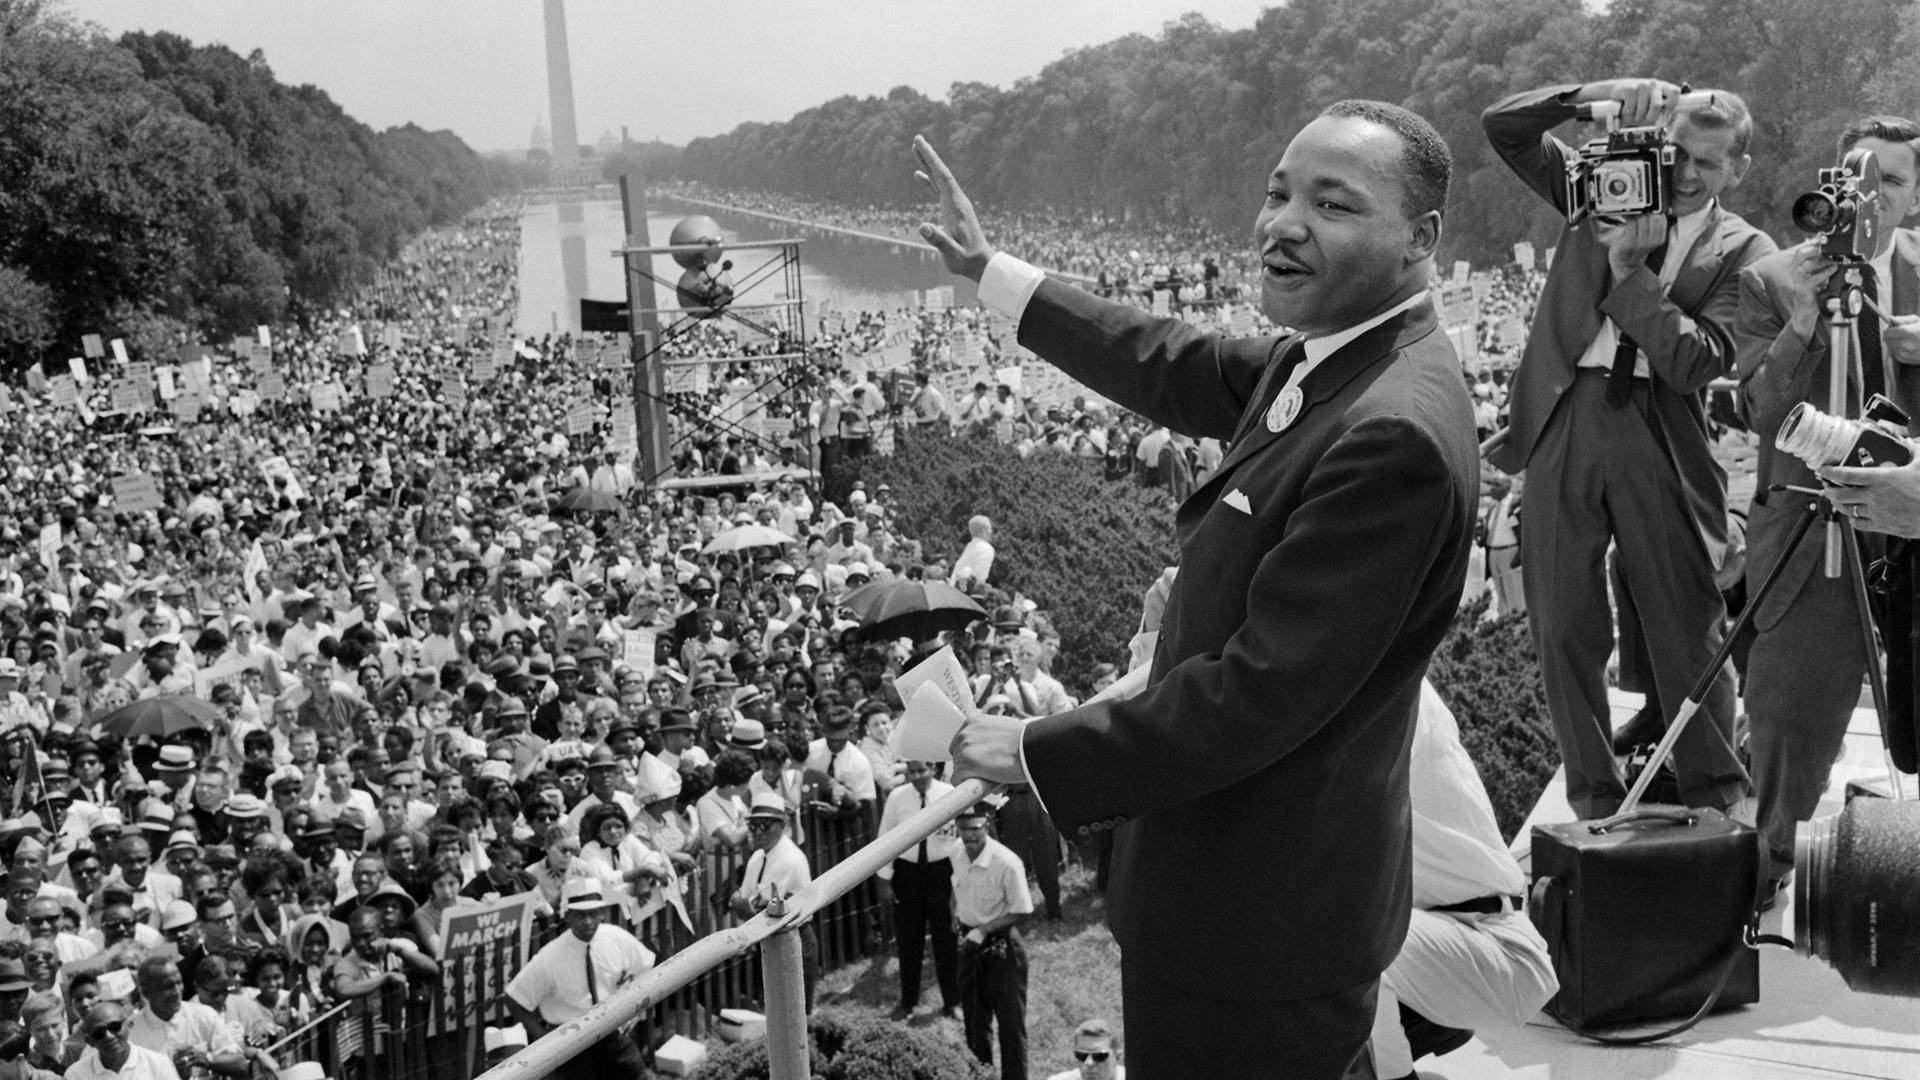 The civil rights leader Martin Luther King waves to supporters on Aug. 28, 1963 at the March on Washington.  AFP/Getty Images